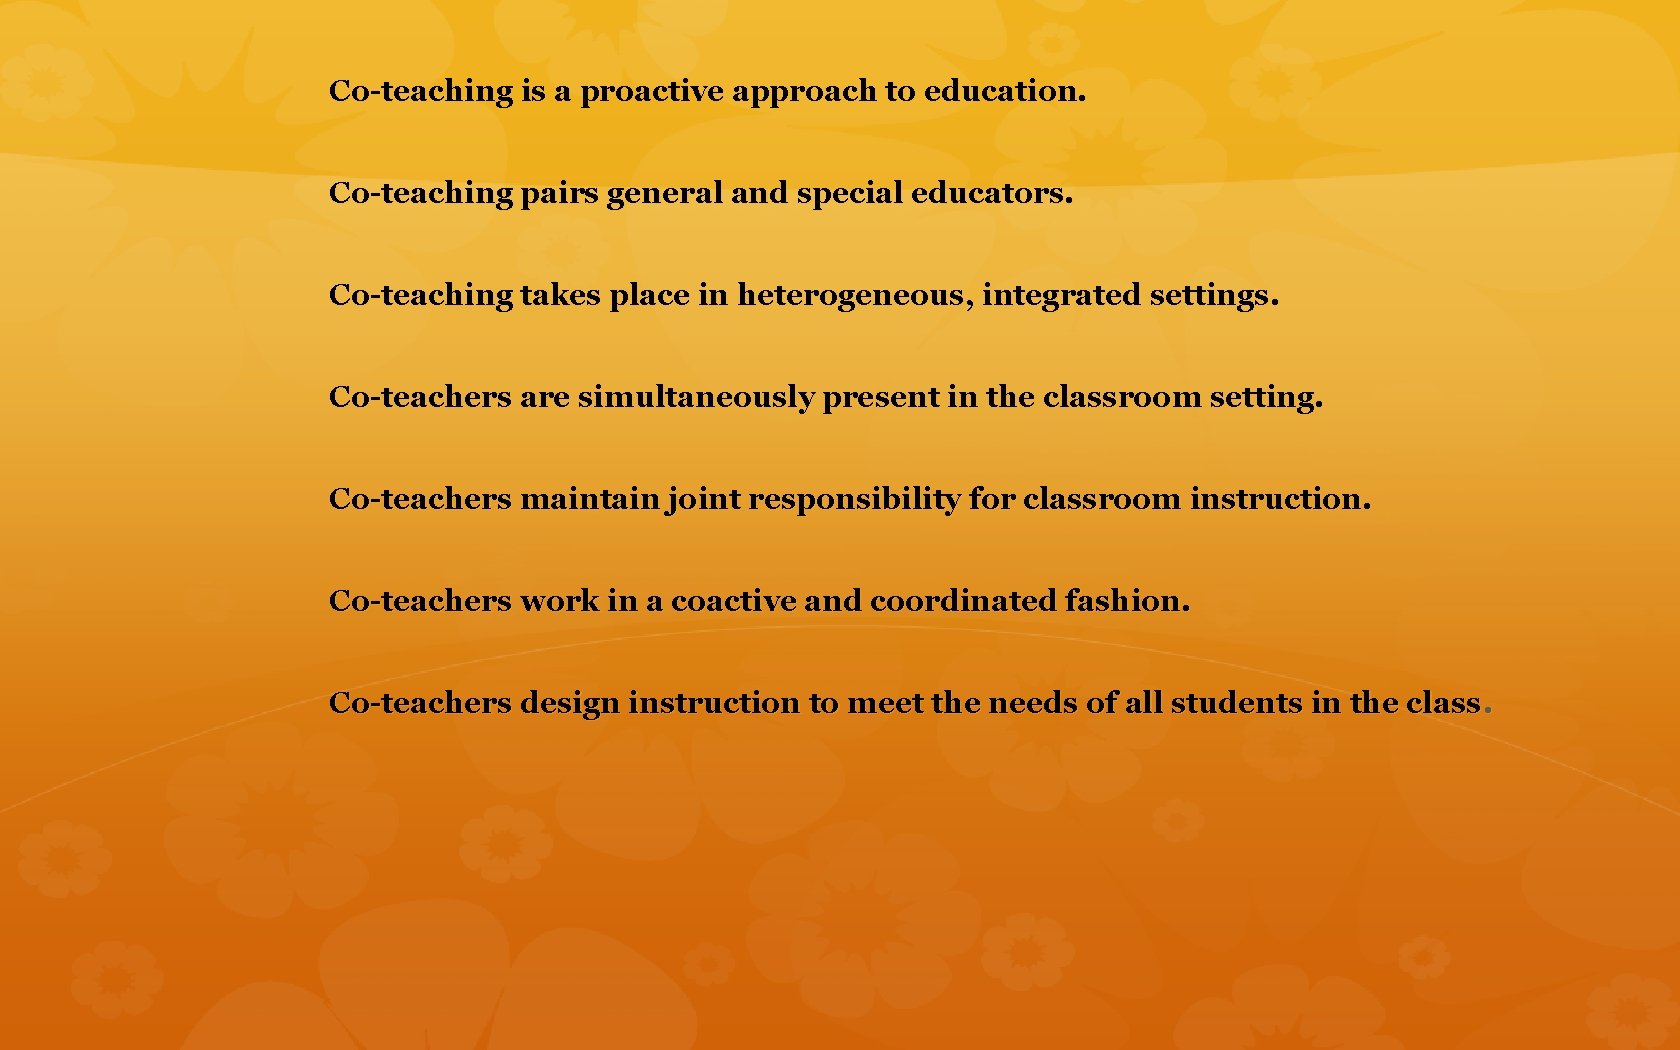 Co-teaching is a proactive approach to education. Co-teaching pairs general and special educators. Co-teaching